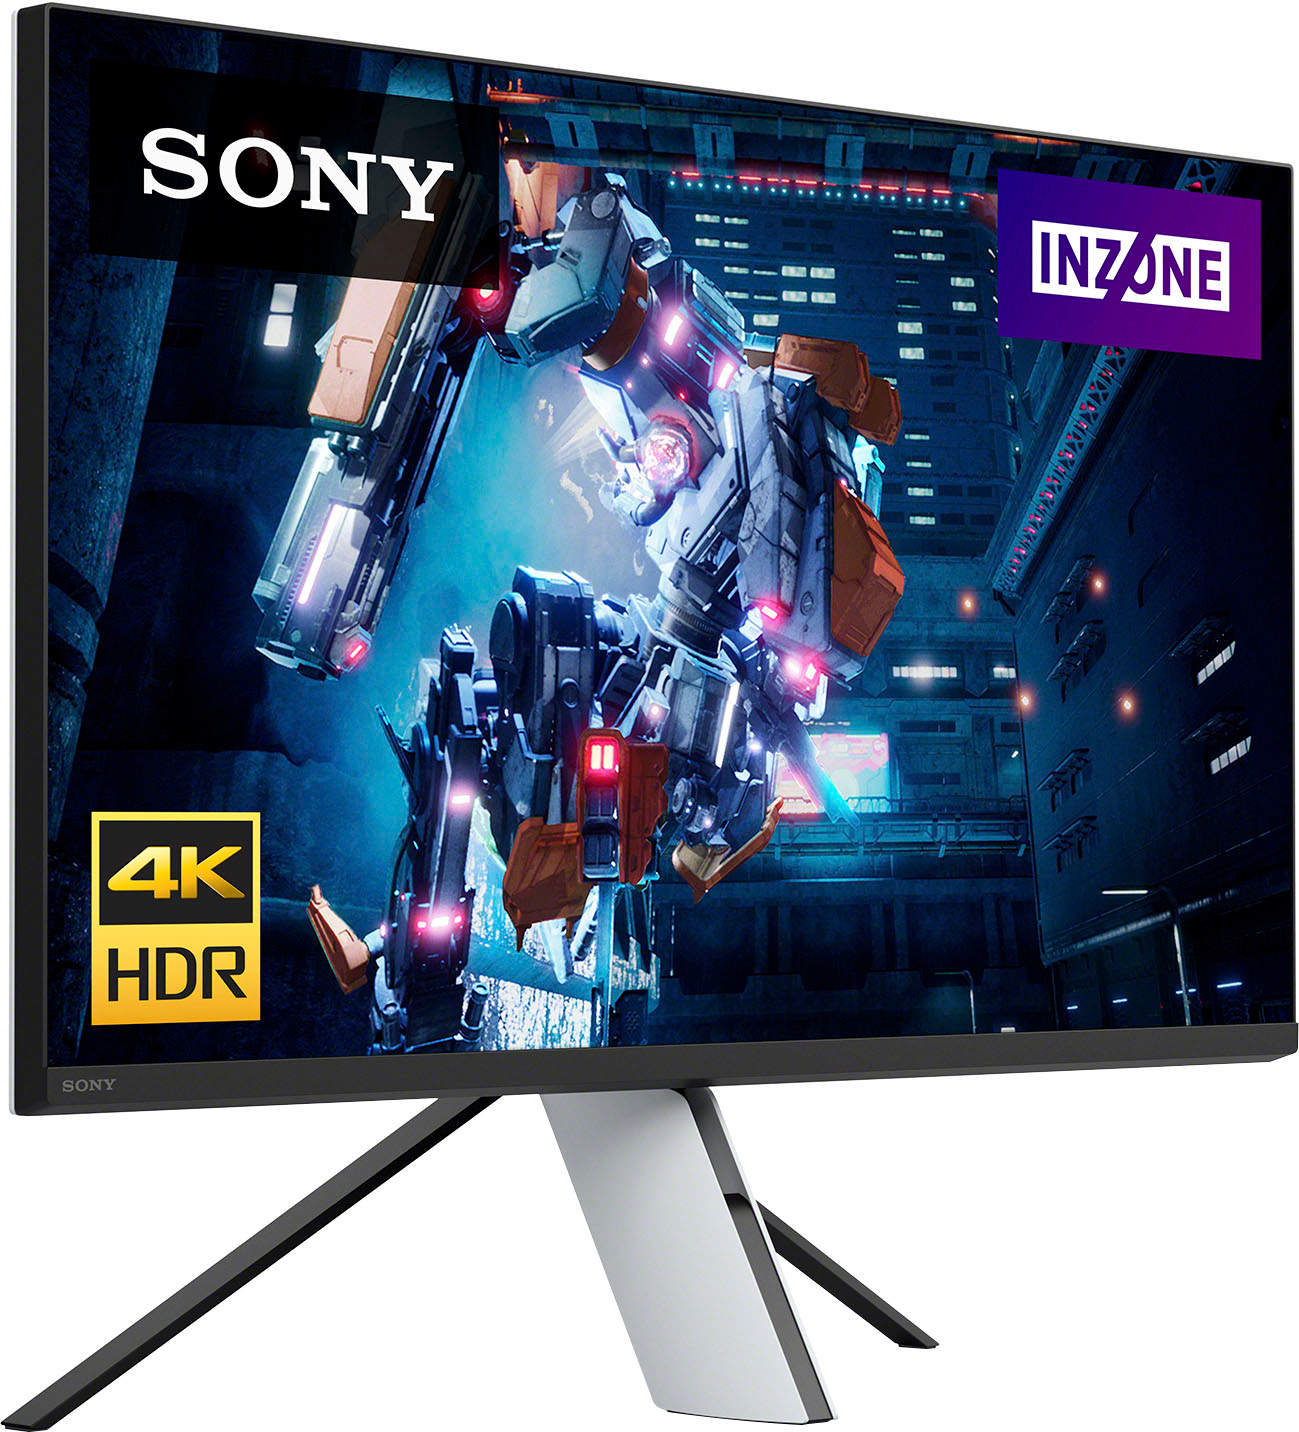 Sony 27” INZONE M9 4K HDR 144Hz Gaming Monitor with Full Array 